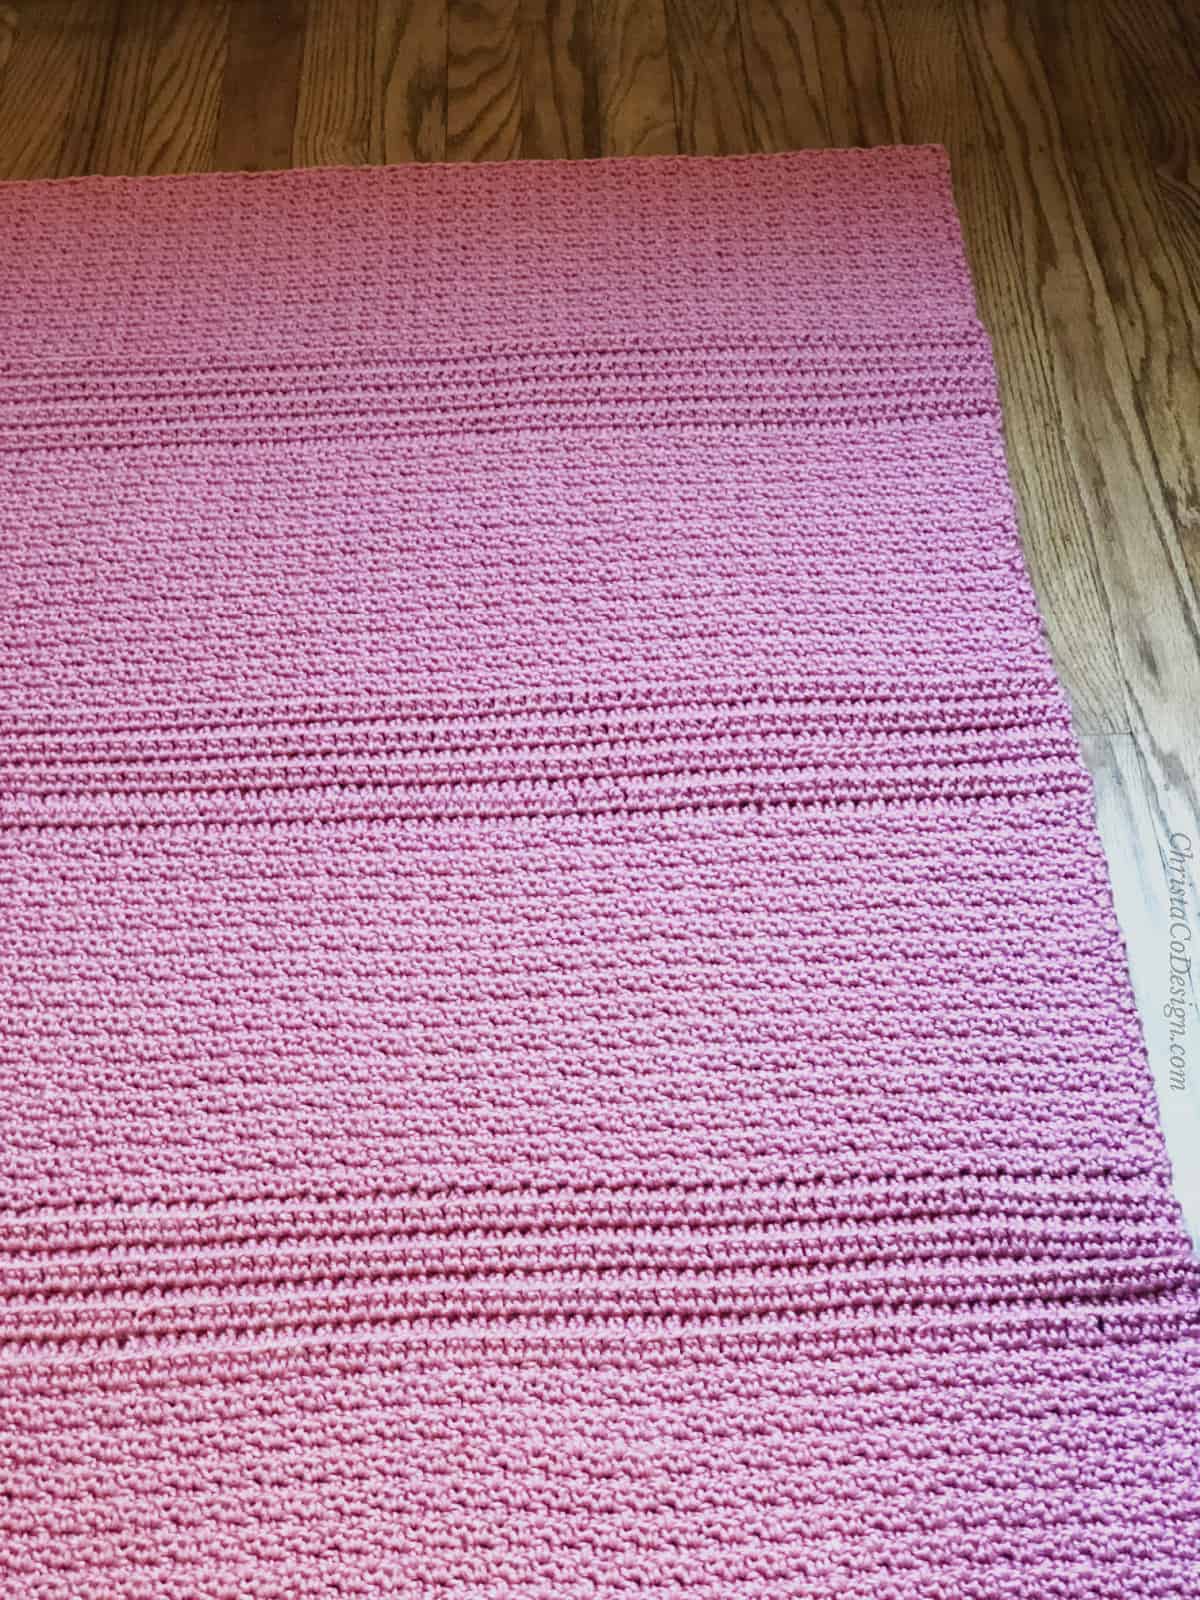 Pink crochet blanket laid flat on wood floor to show texture.